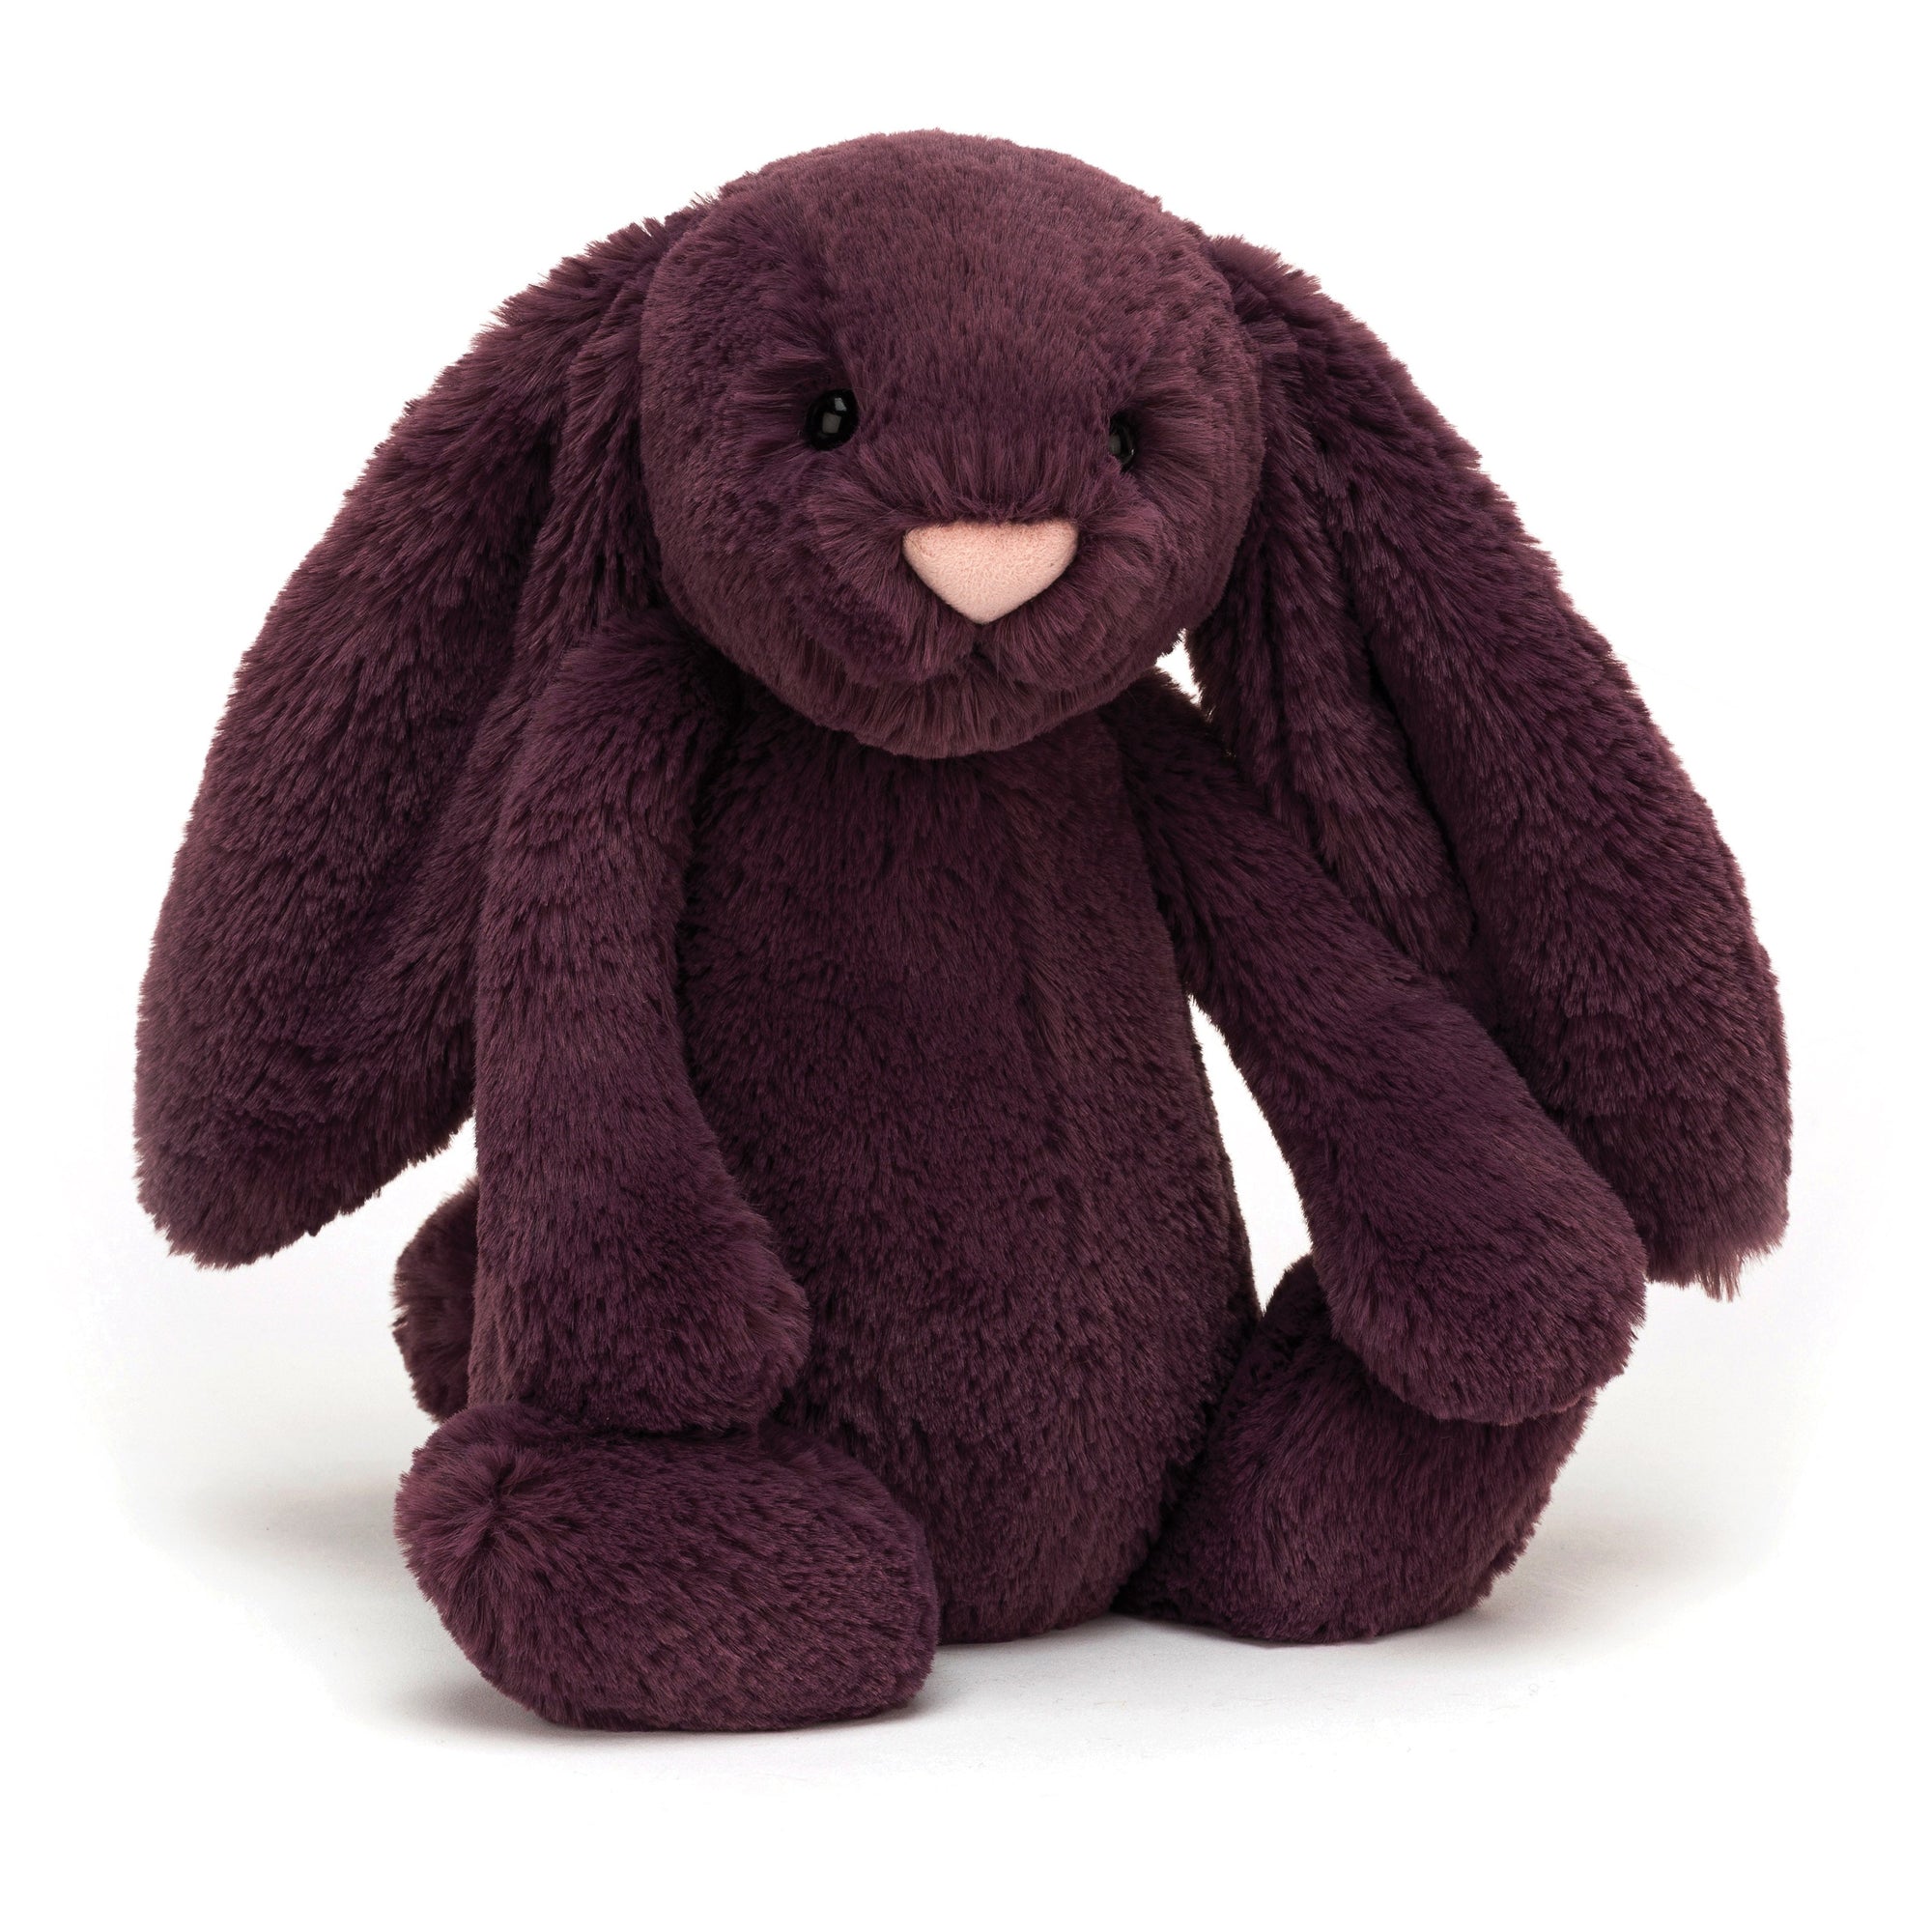 Jellycat plum bunny - angus and dudley